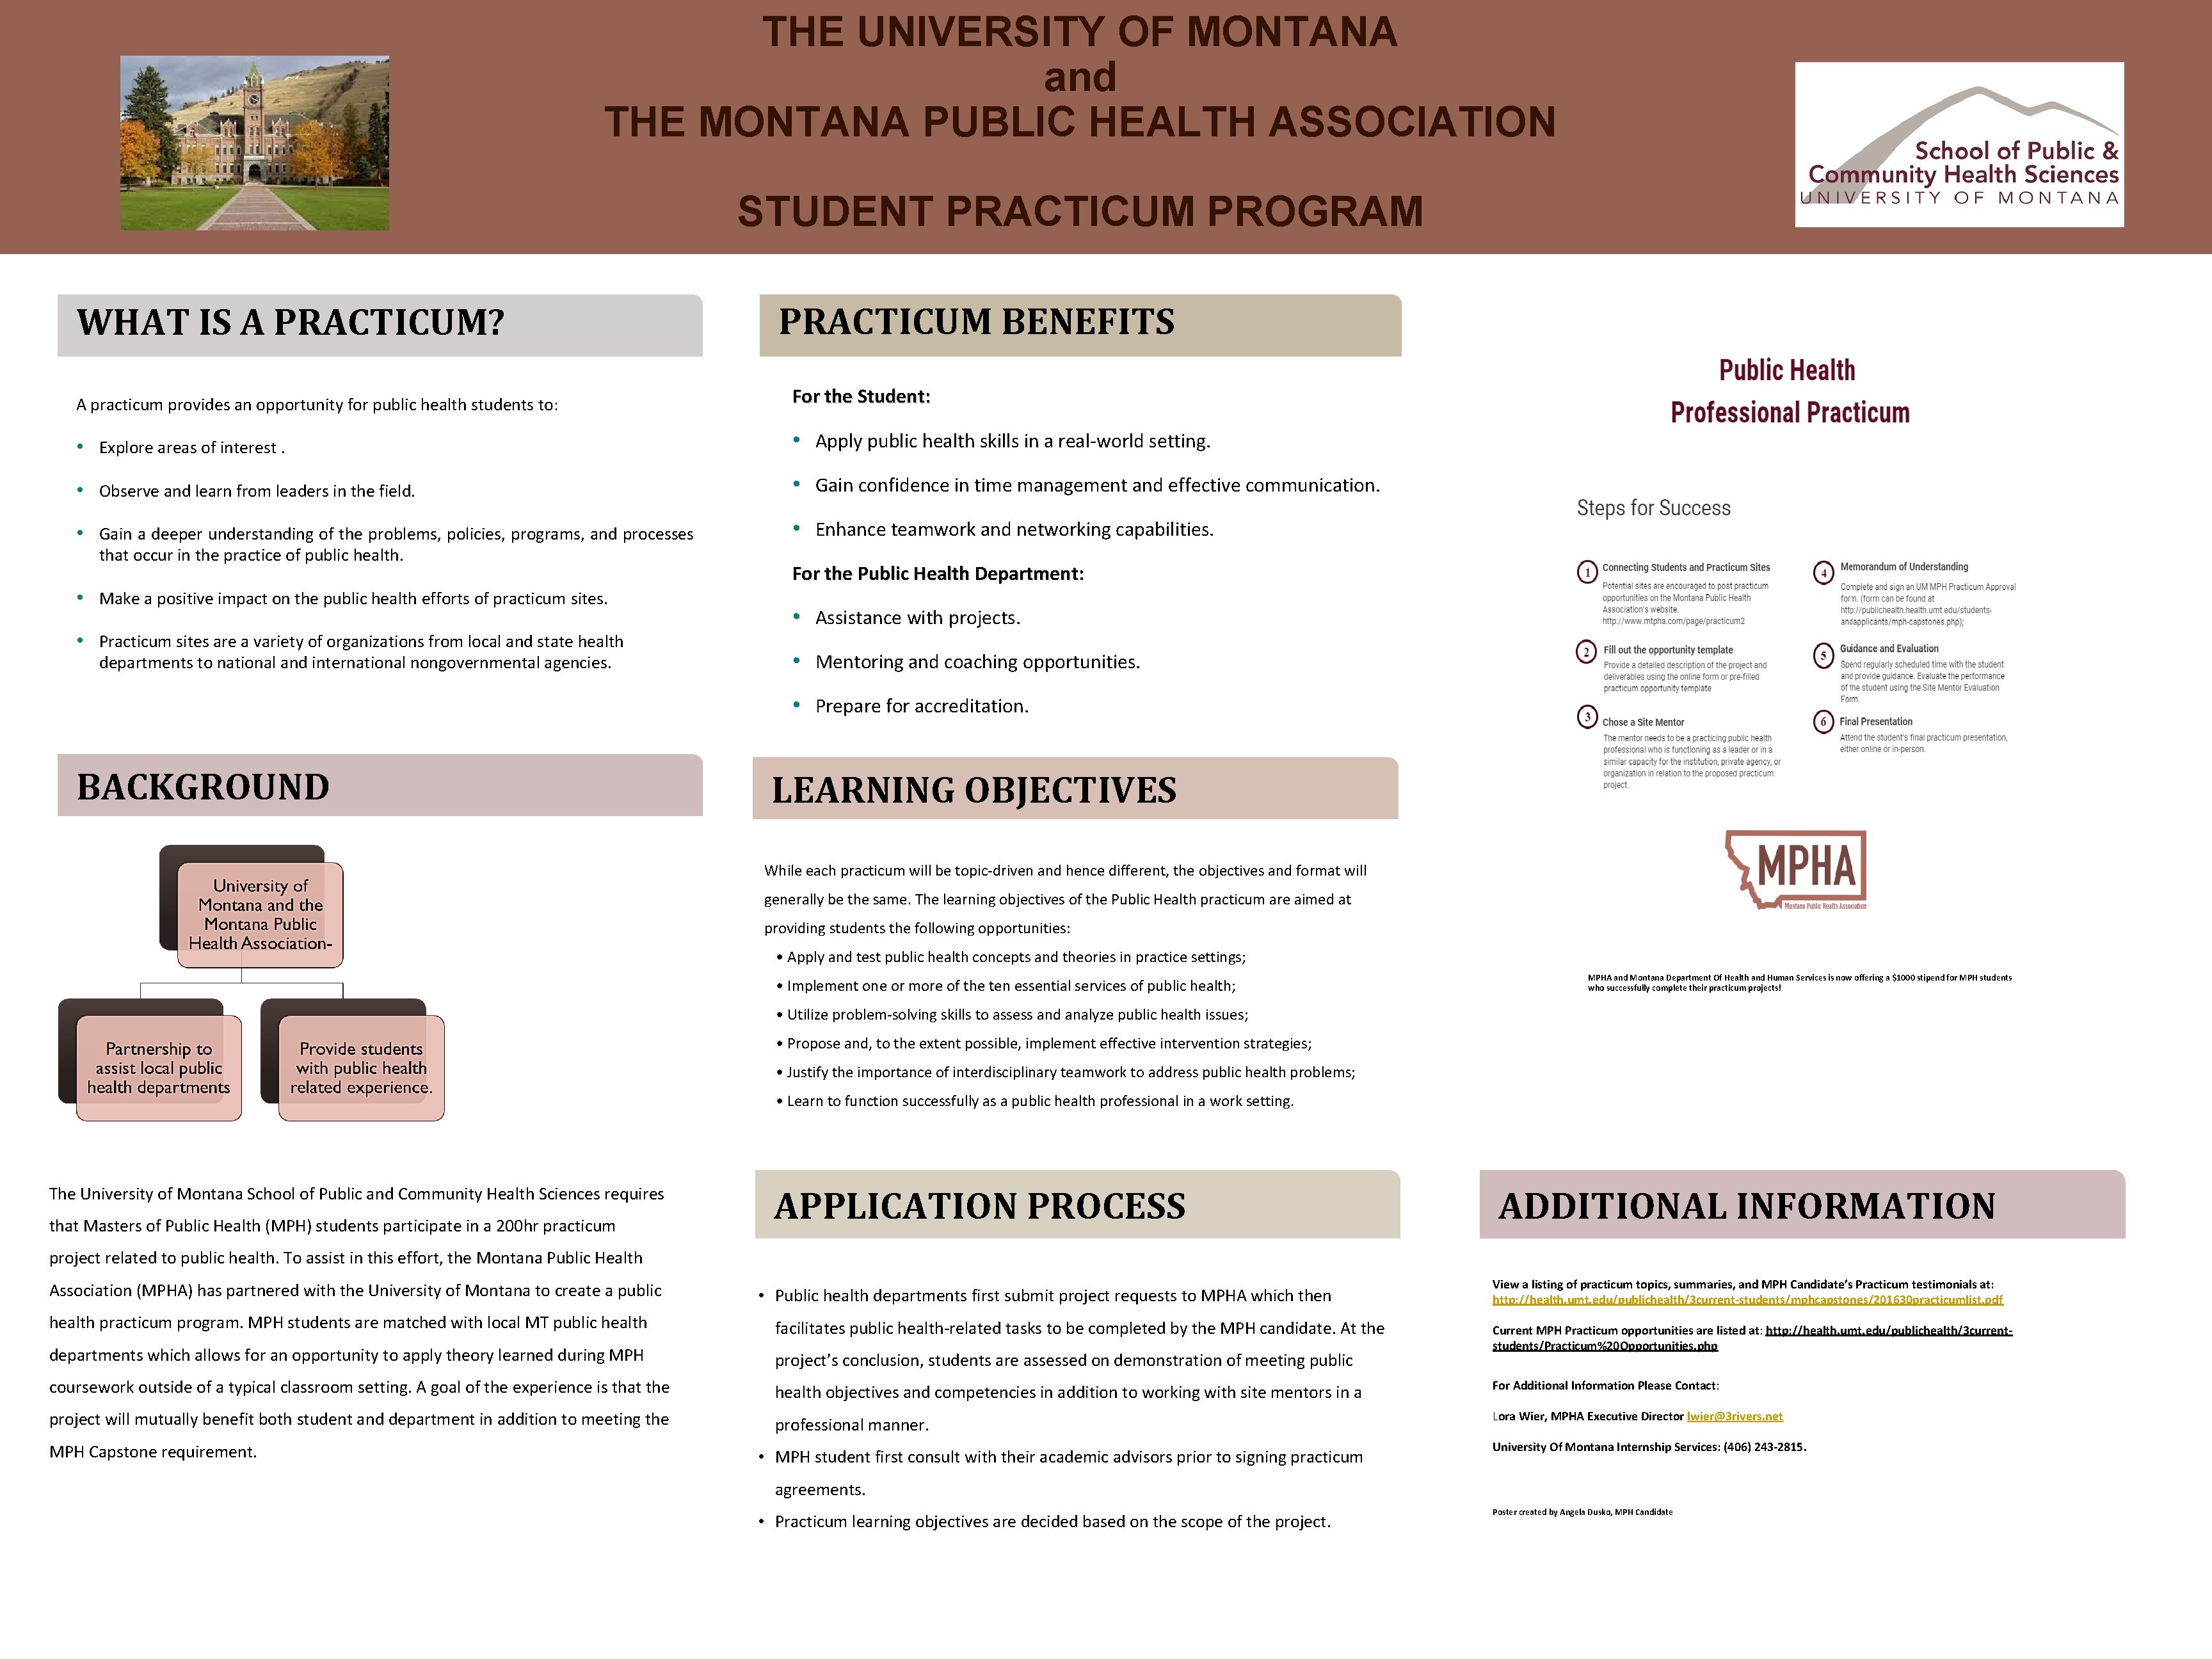 THE UNIVERSITY OF MONTANA and THE MONTANA PUBLIC HEALTH ASSOCIATION STUDENT PRACTICUM PROGRAM WHAT